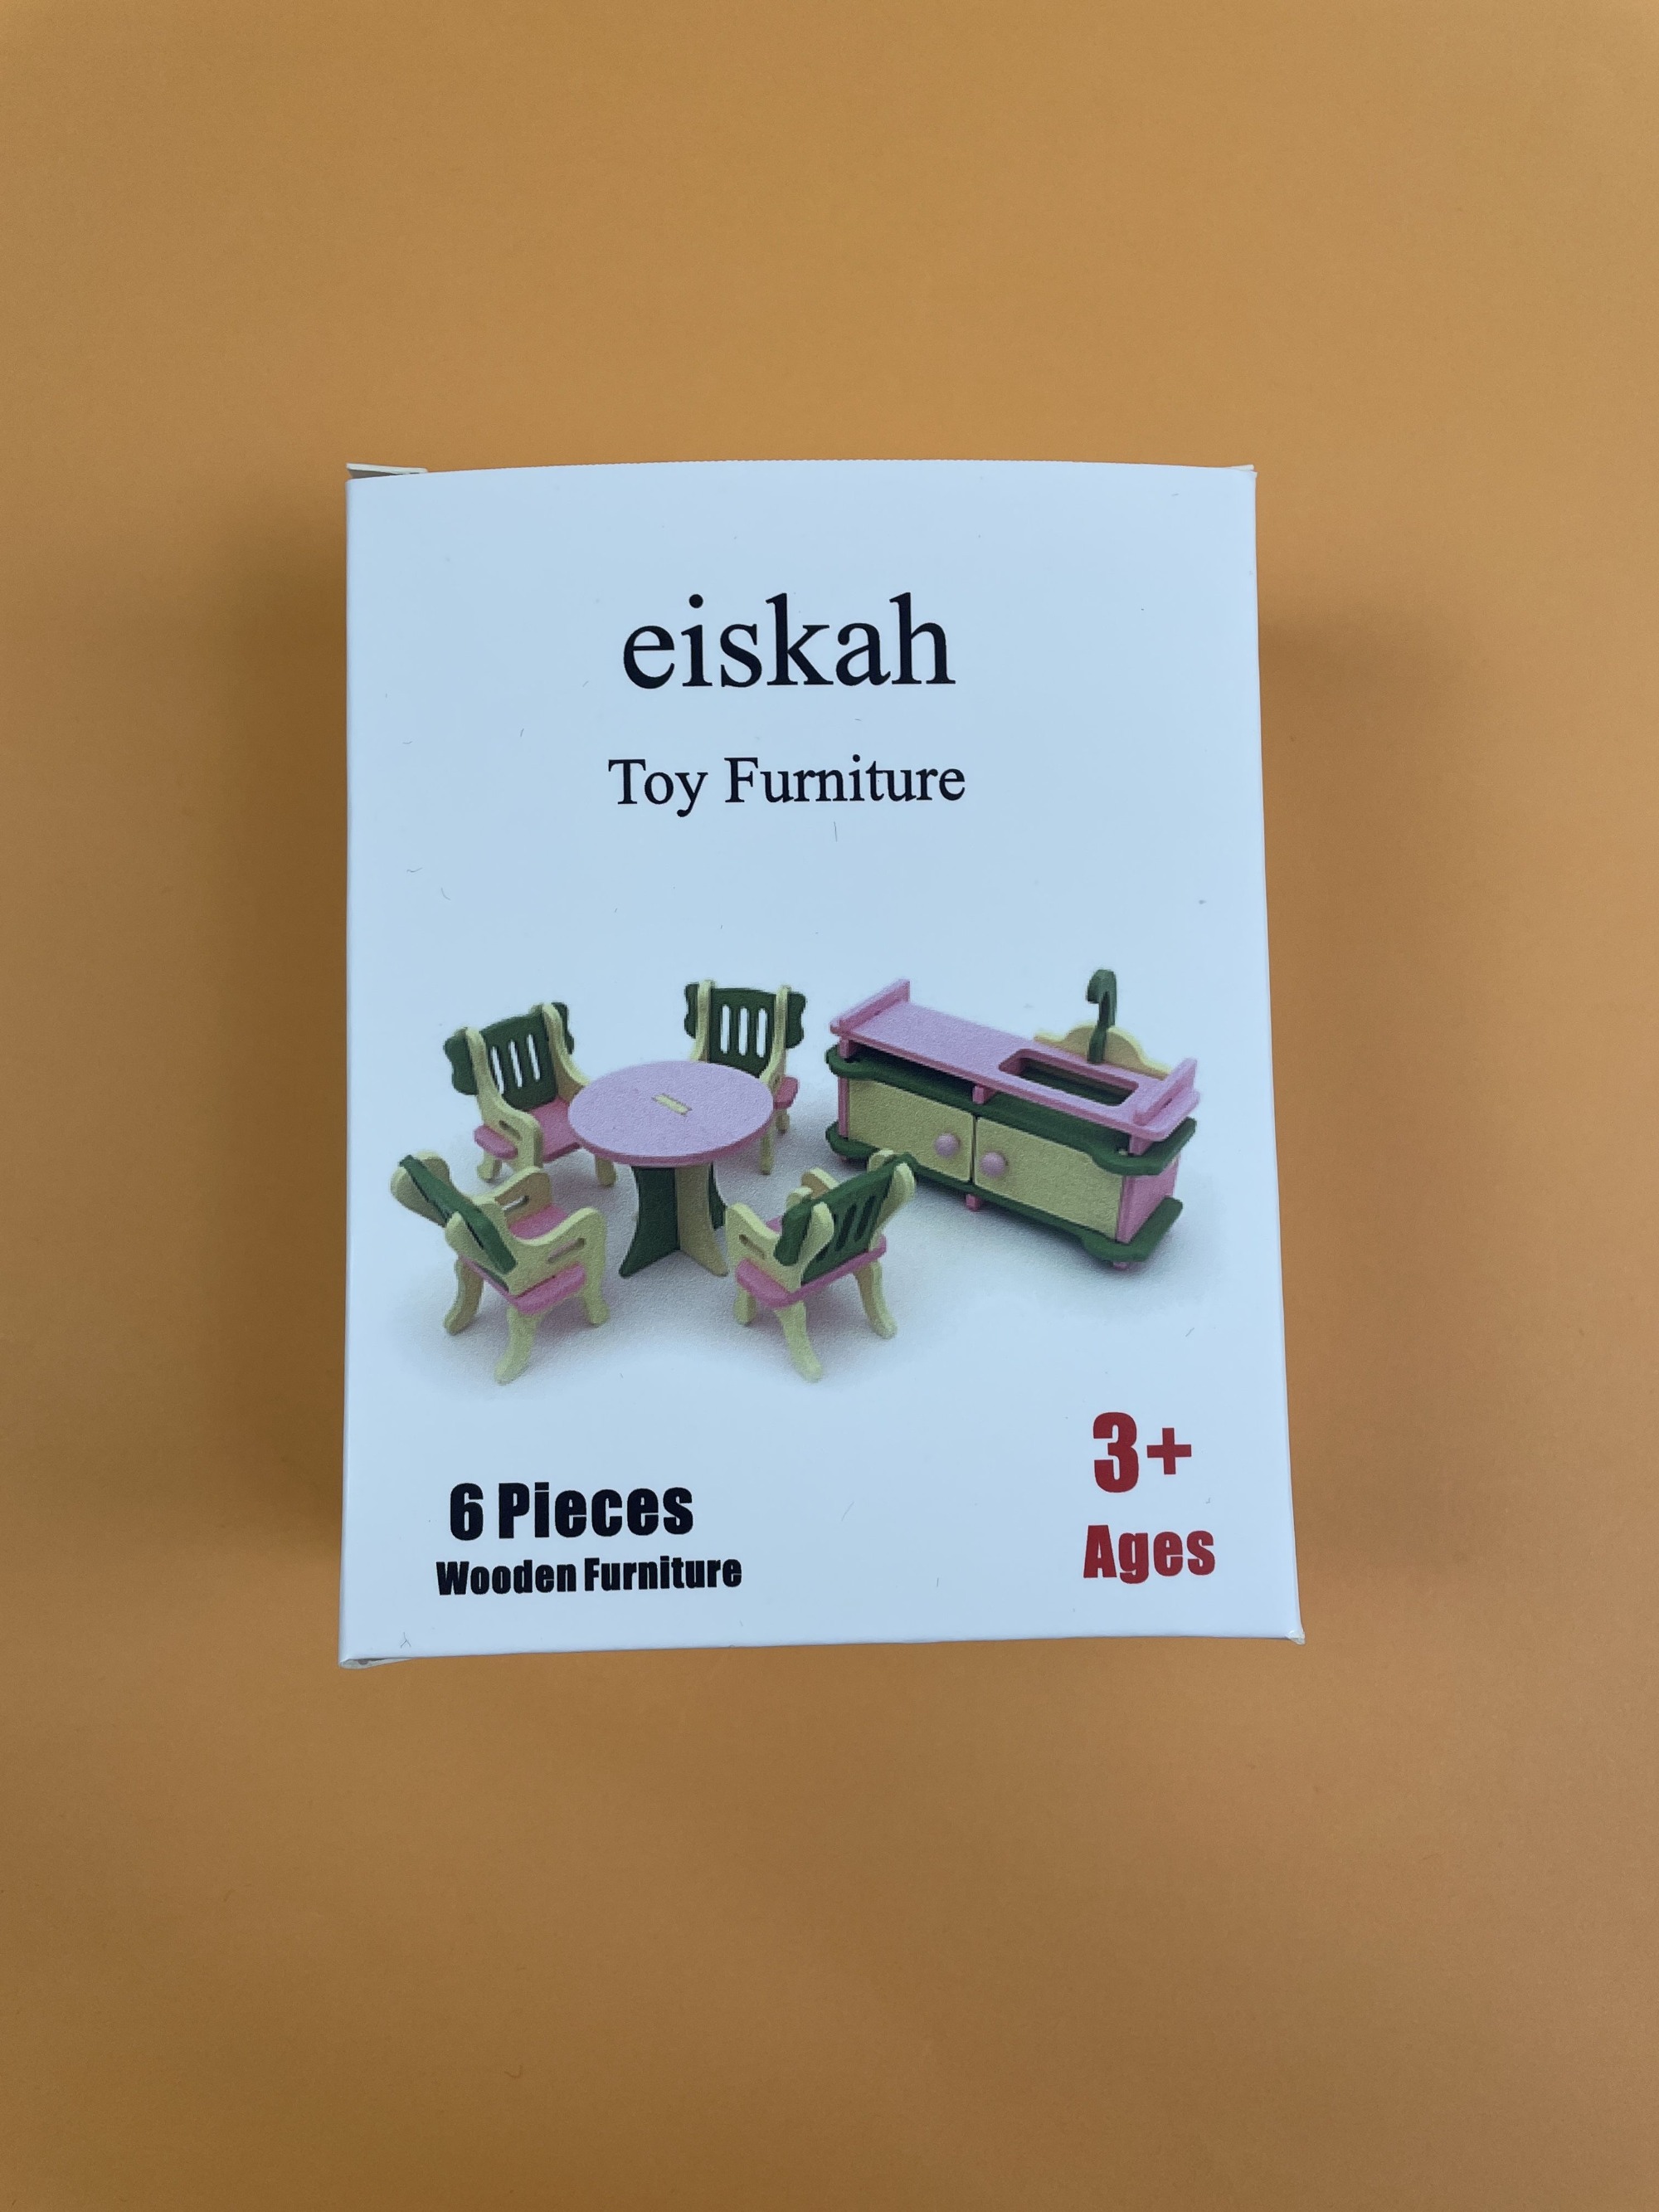 eiskah toy furniture, eco-friendly, non-toxic, durable, great birthday and christmas gift for toddlers age 3 and up